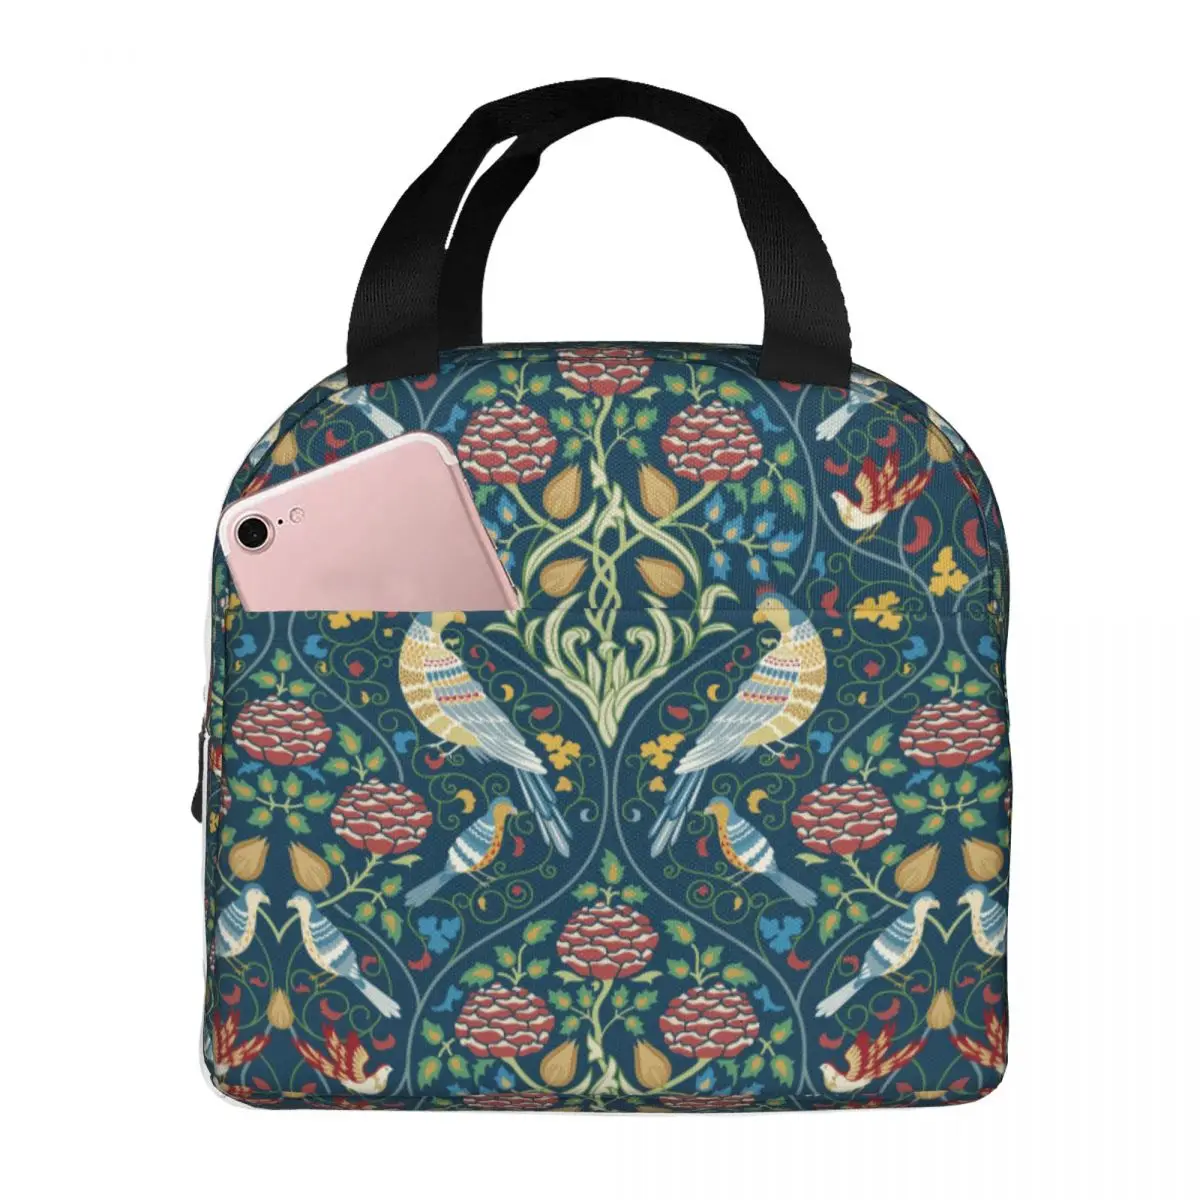 Lunch Bag for Women Kids William Morris Garden Thermal Cooler Portable Picnic School Blue Oxford Lunch Box Food Storage Bags